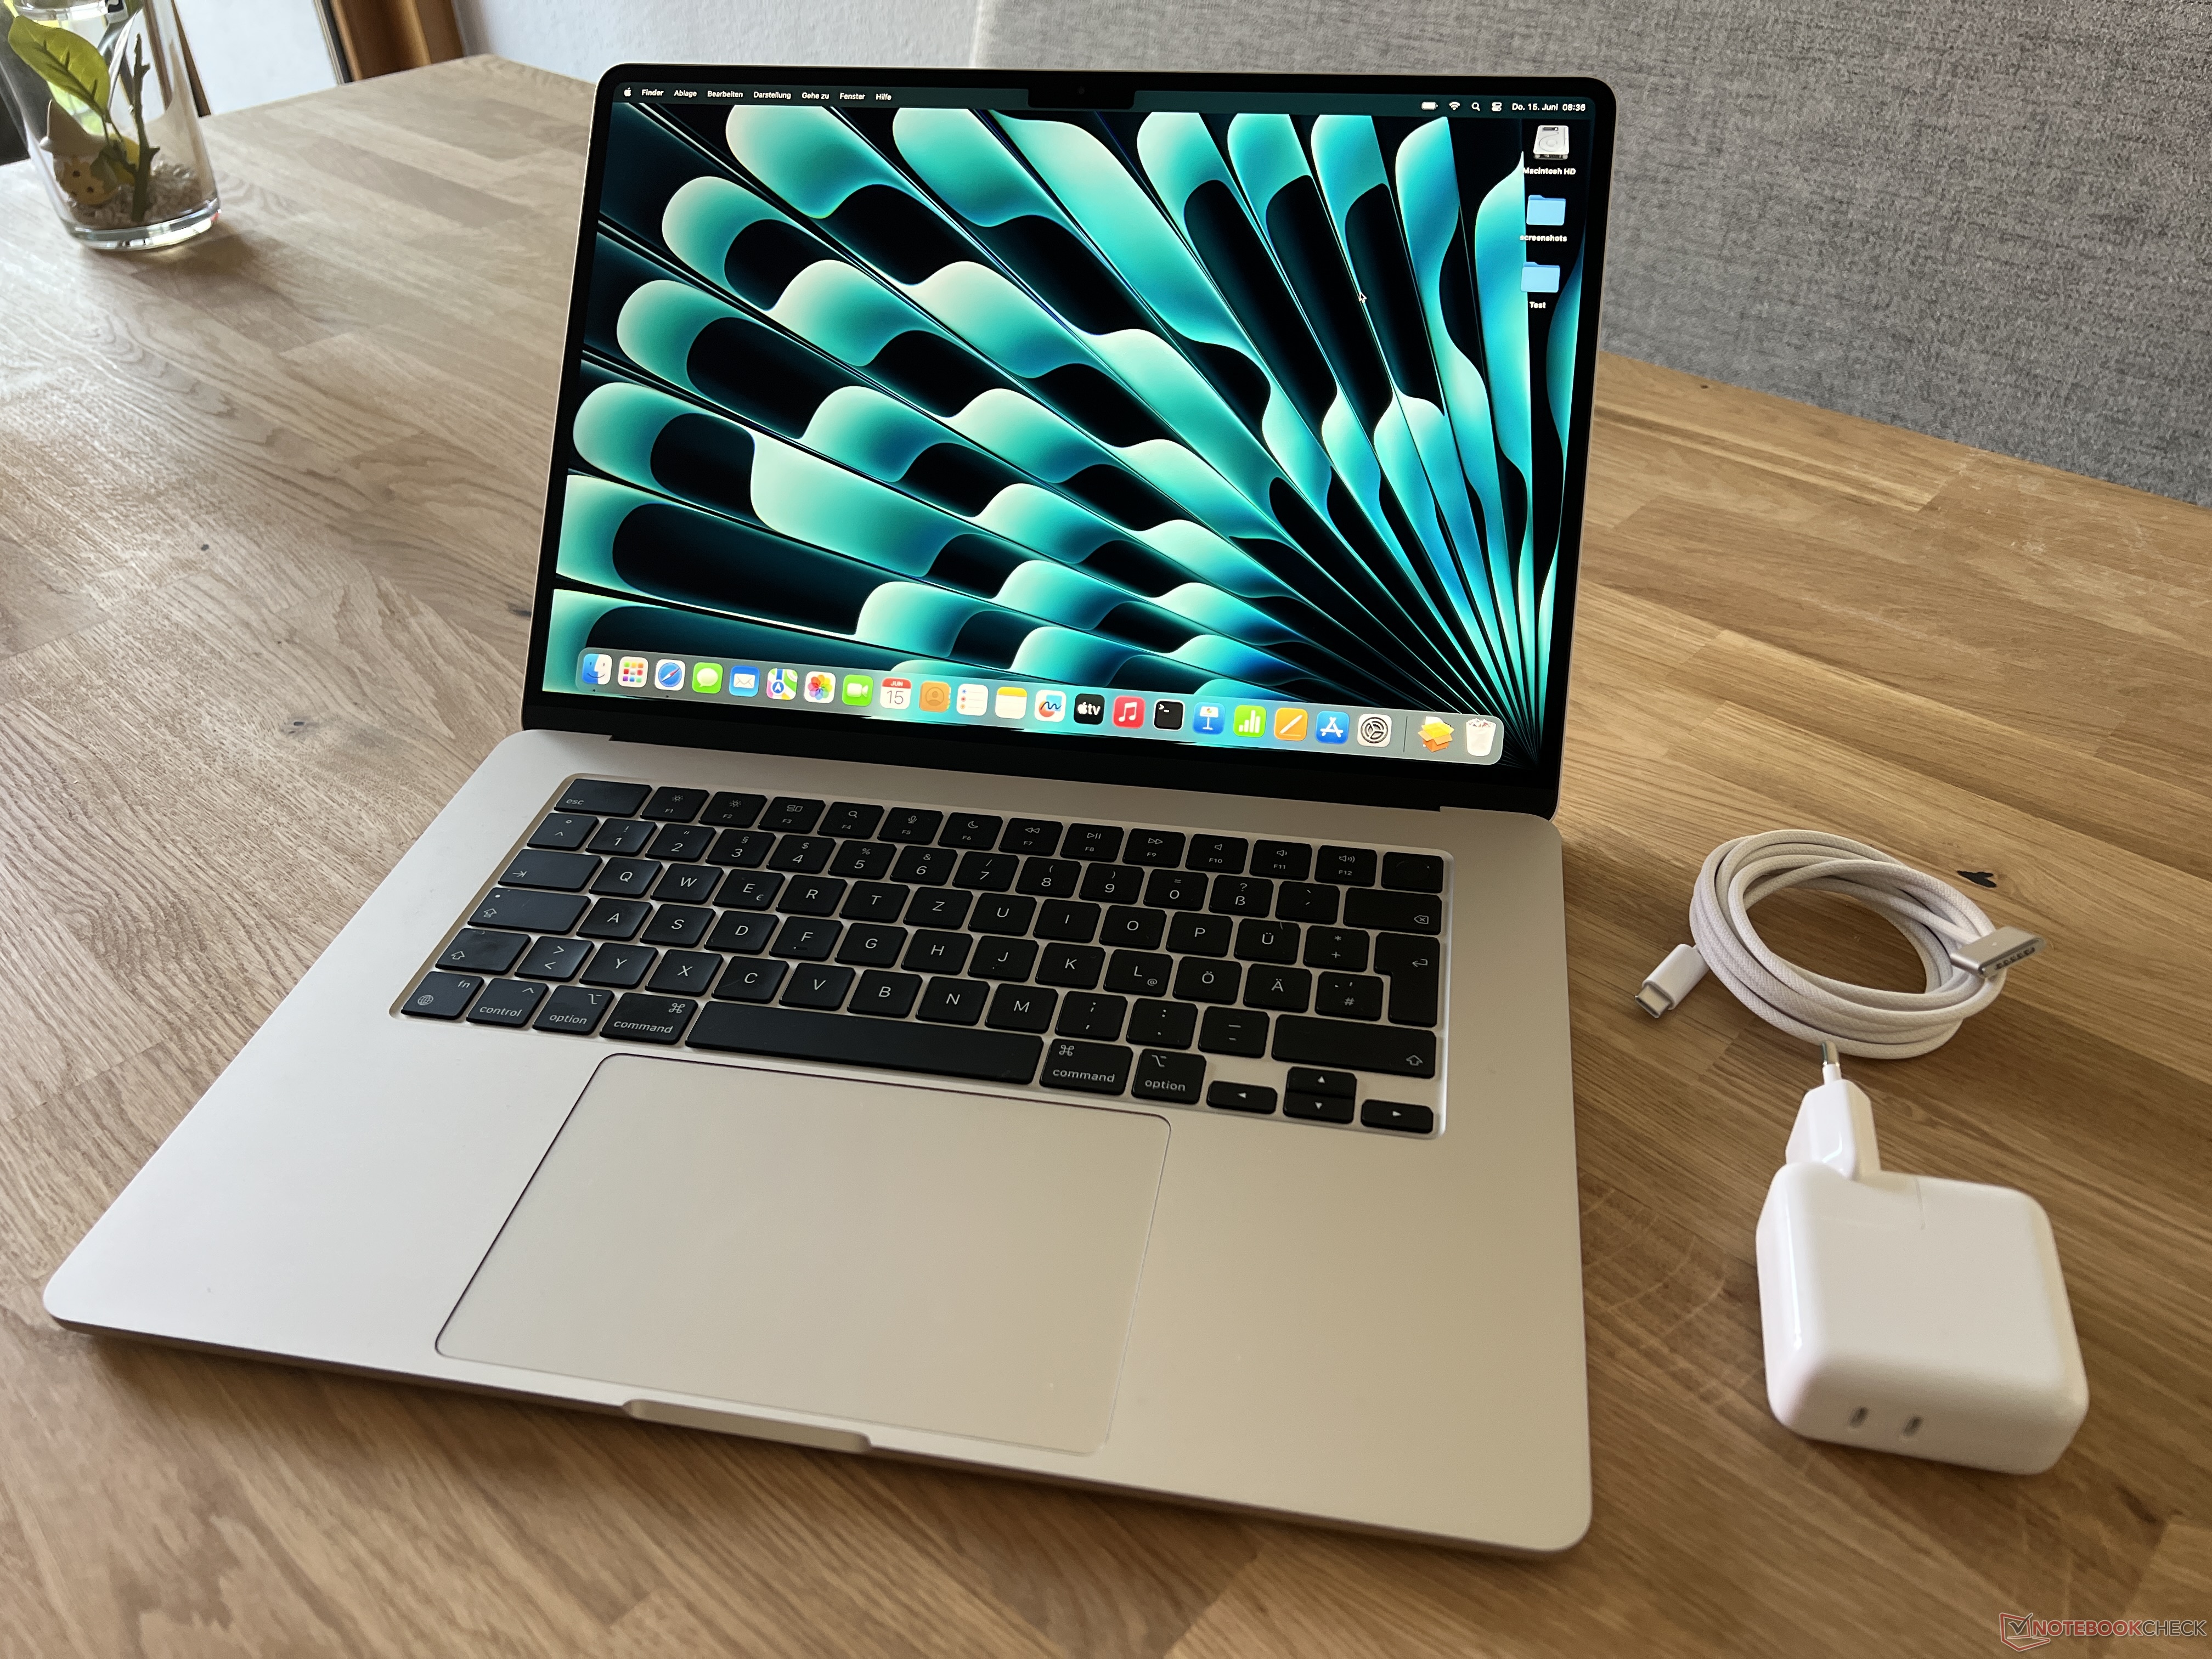 Apple M2 MacBook Air image renders reveal new design, colours and many more  changes